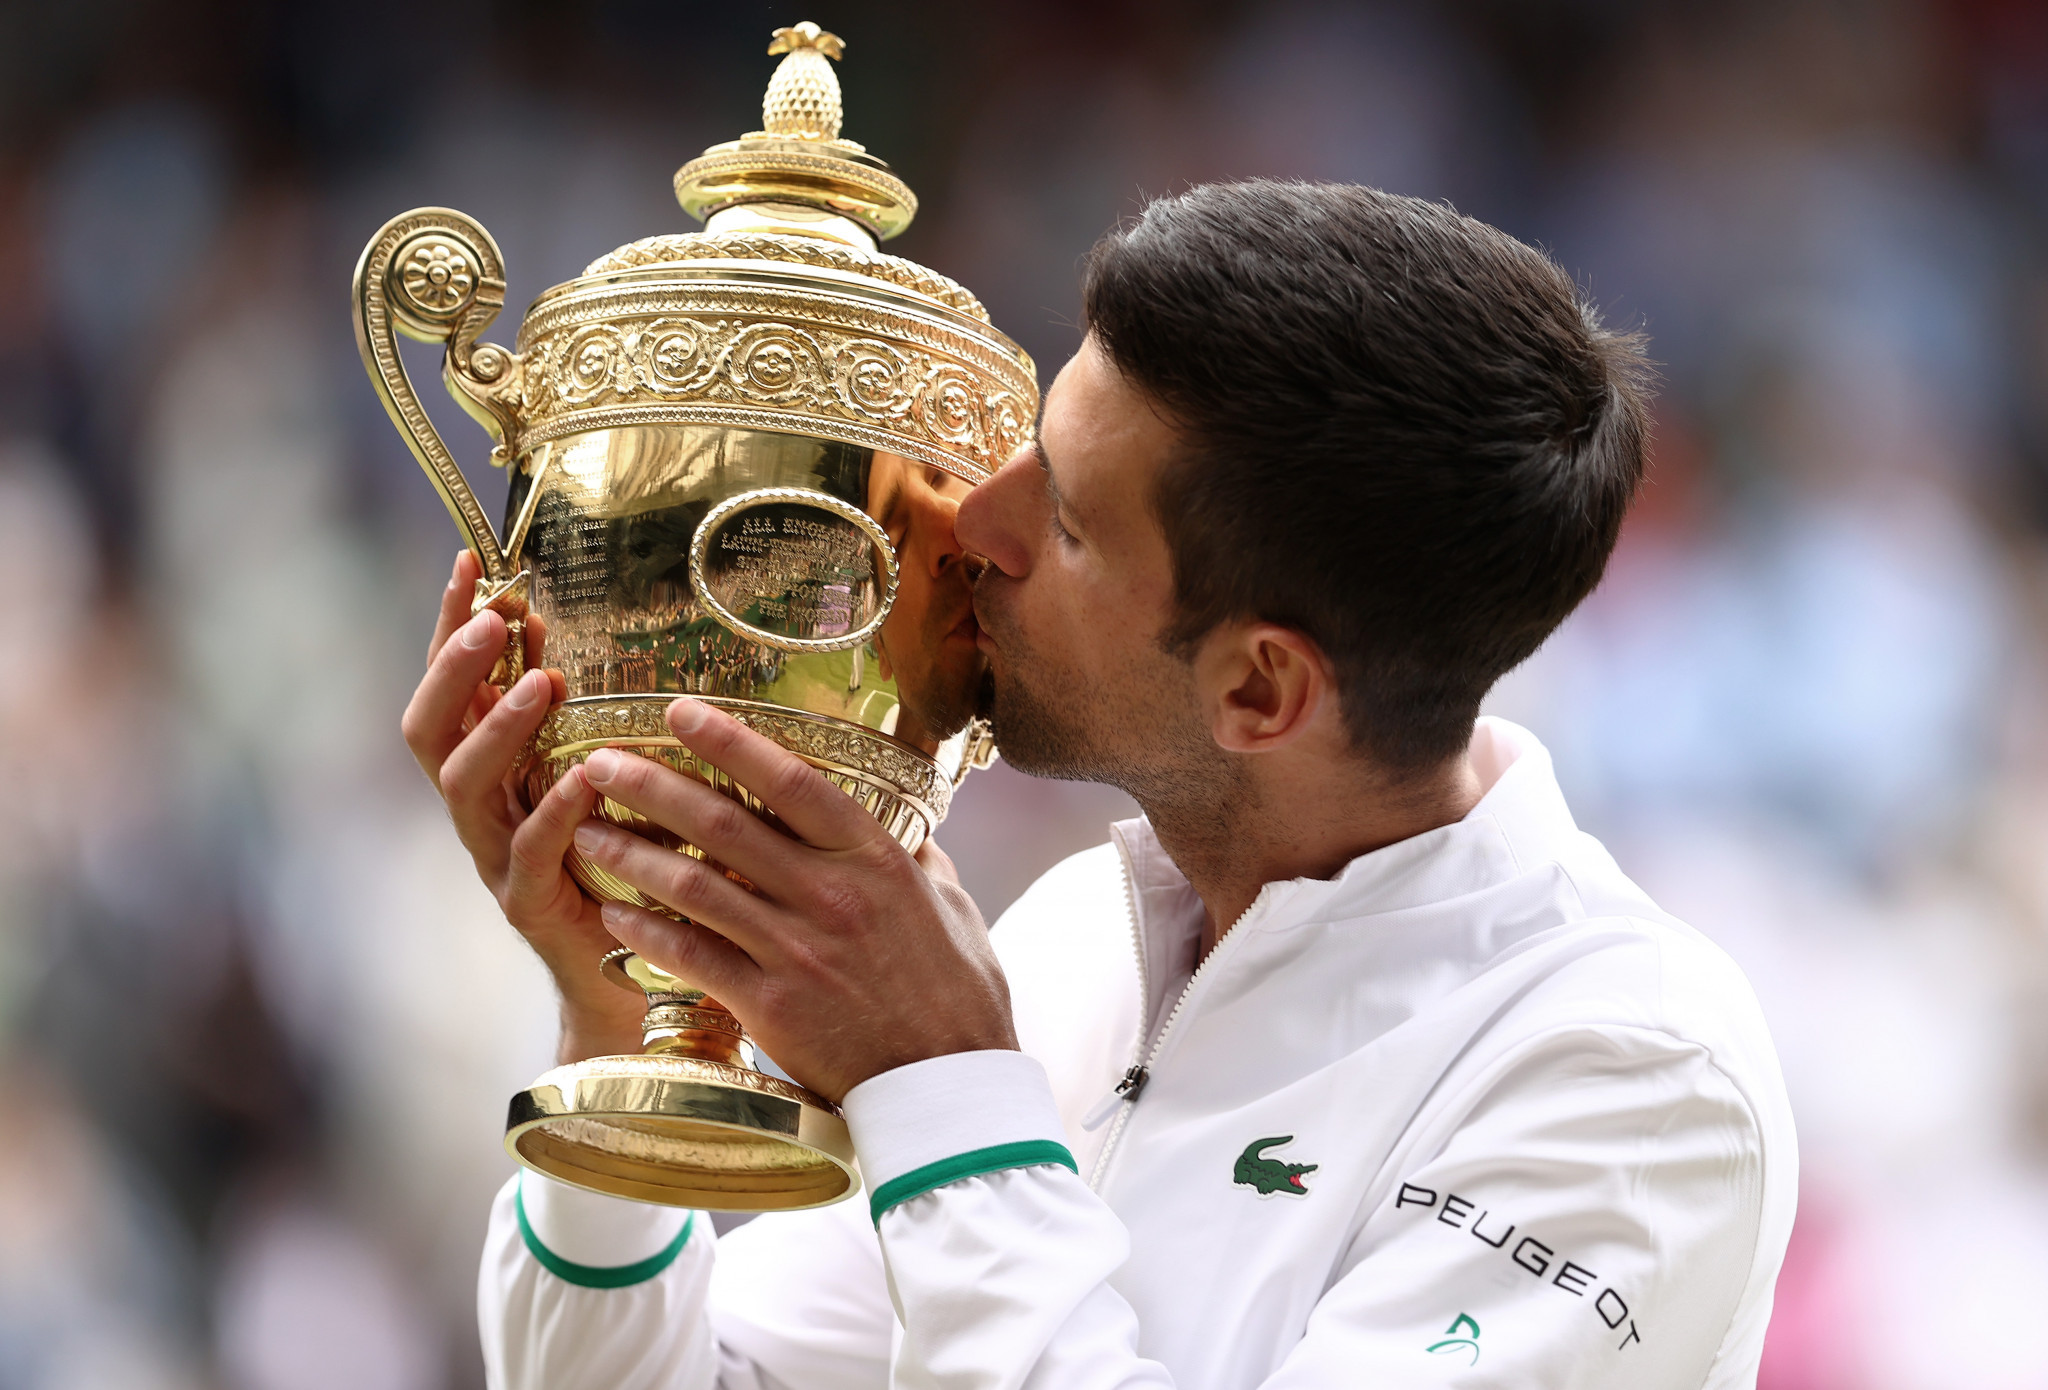 Serbia's Novak Djokovic won three Grand Slams, including Wimbledon, in 2021 to earn a nomination for the Laureus Sports Awards ©Getty Images